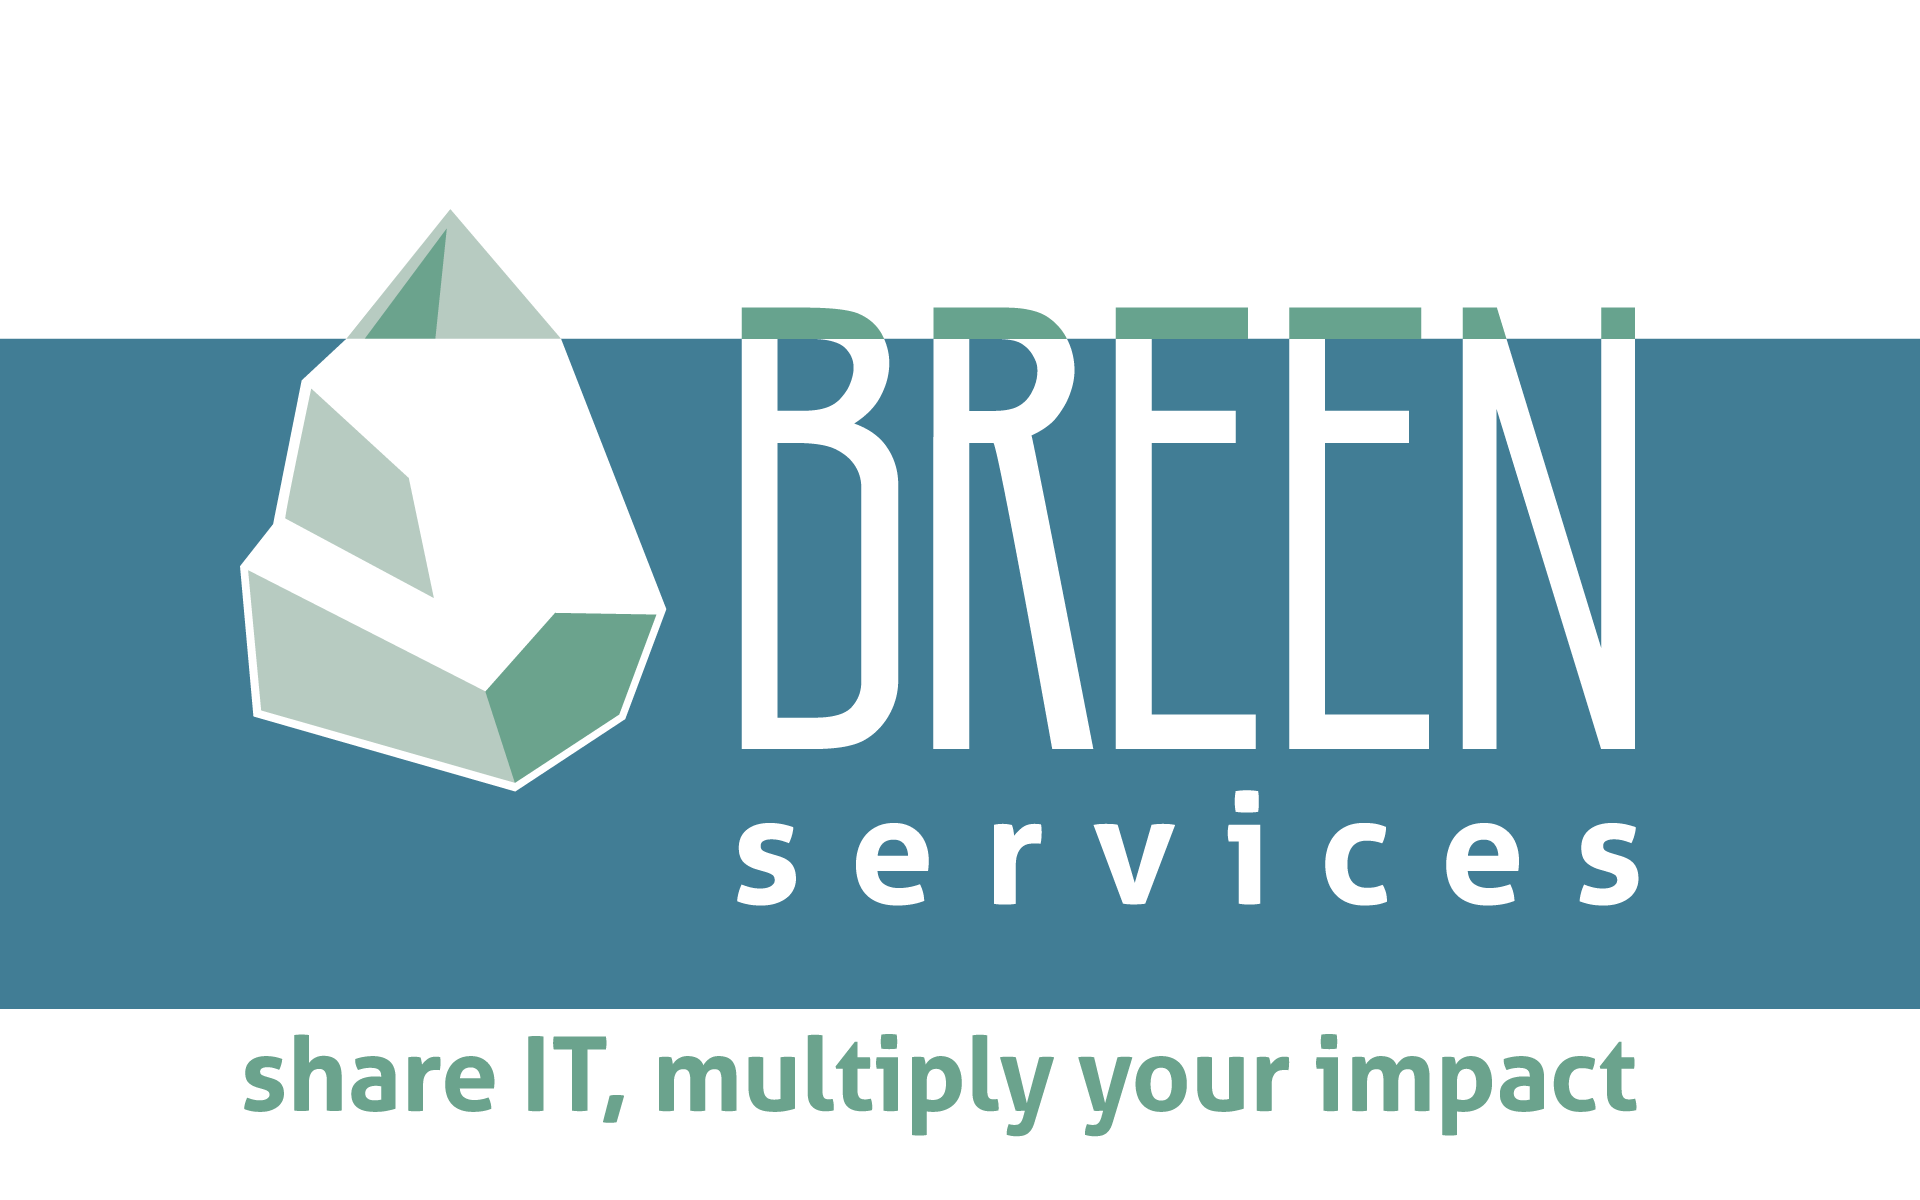 Breen Services - share IT, multiply your impact